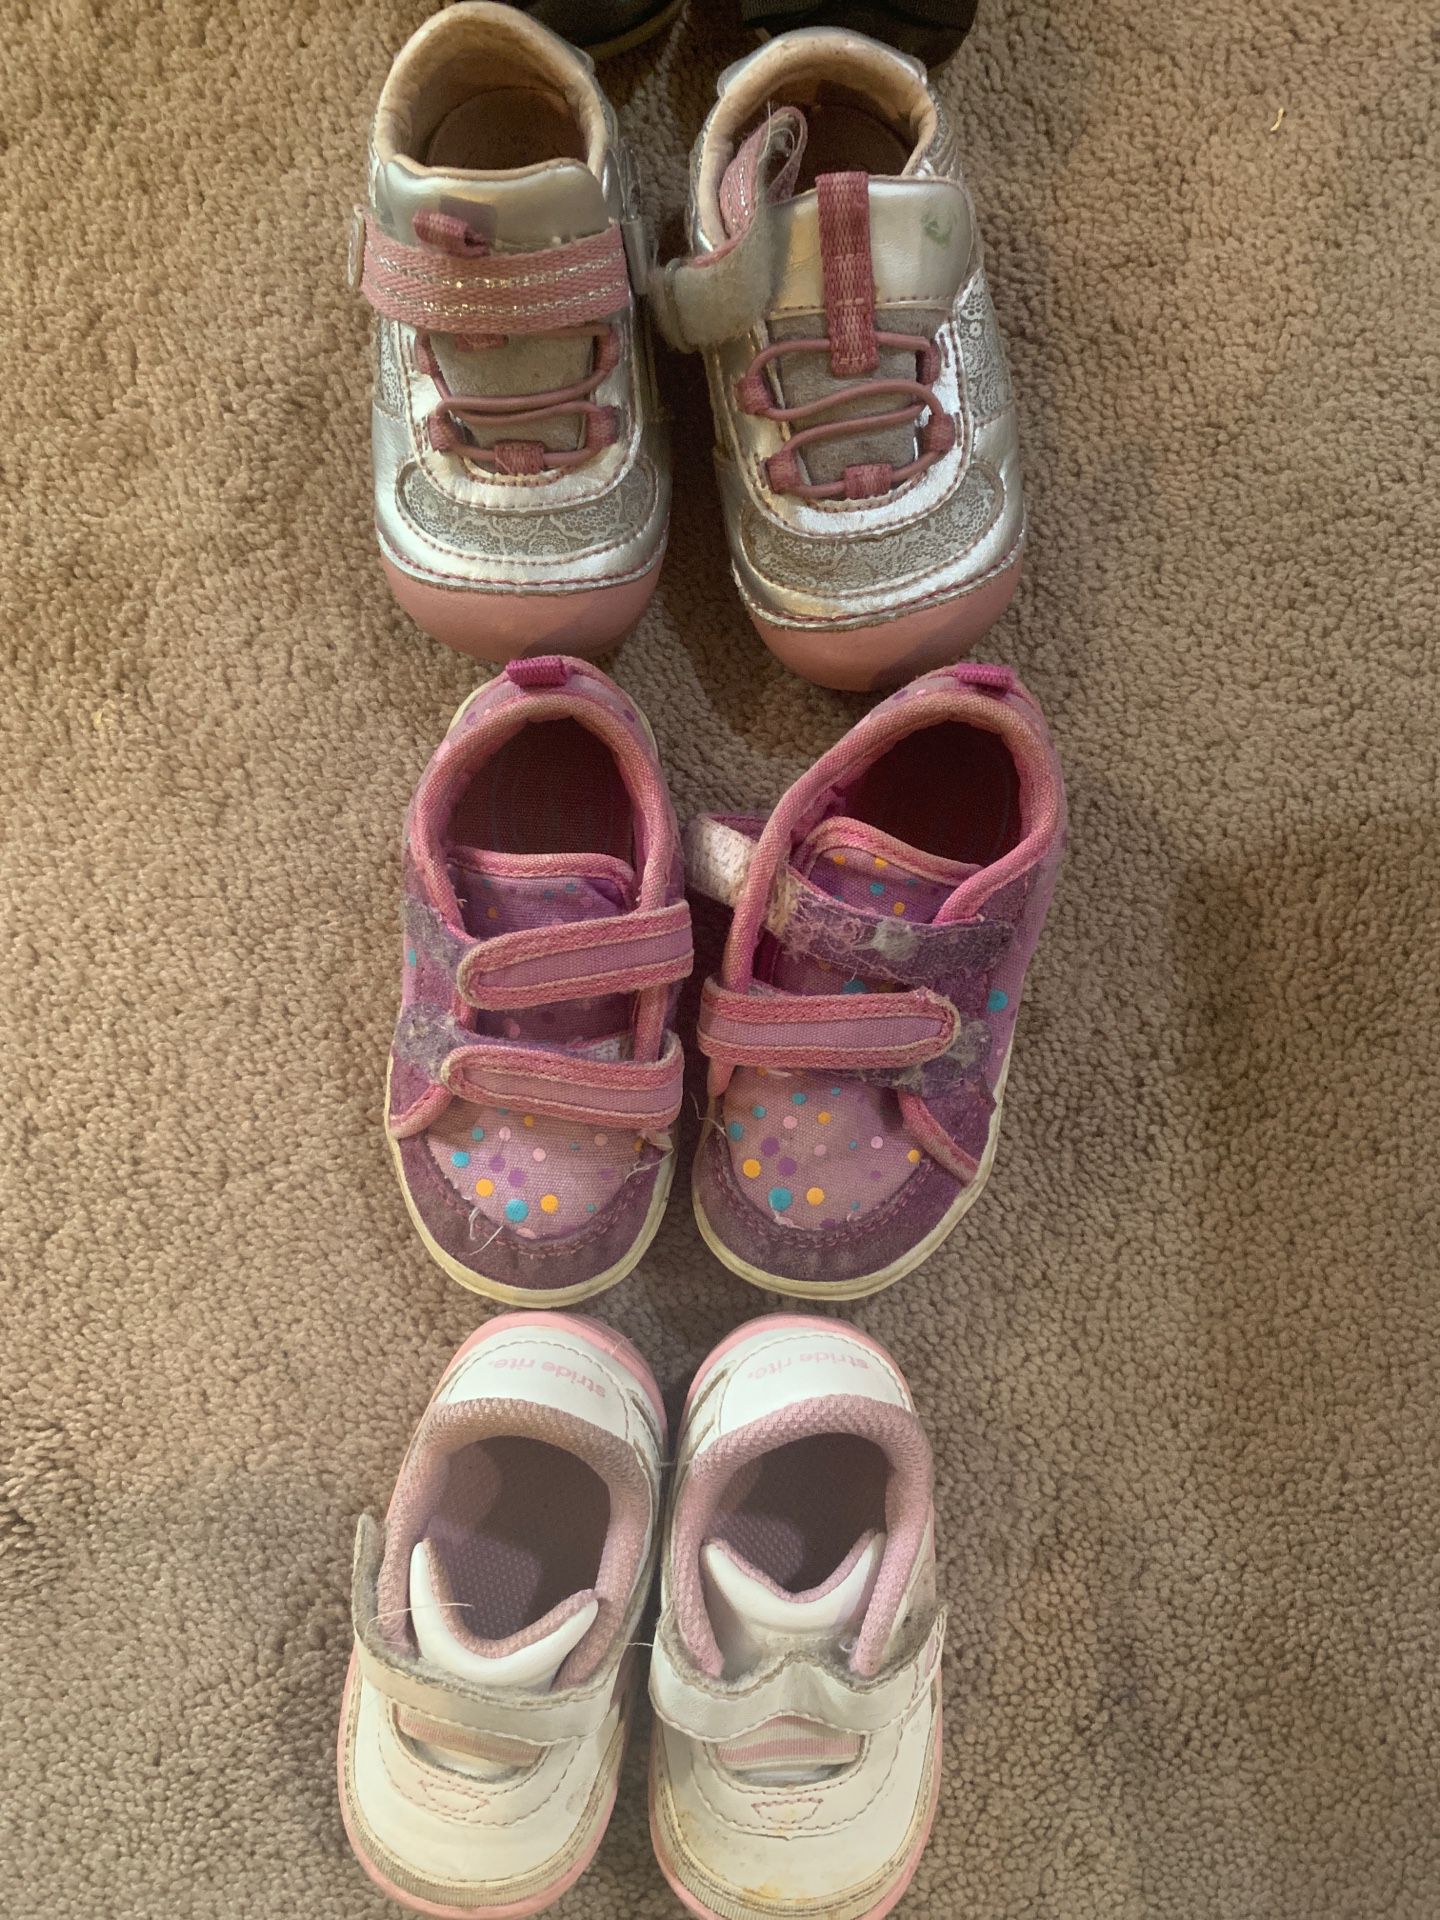 Stride rite toddler shoes